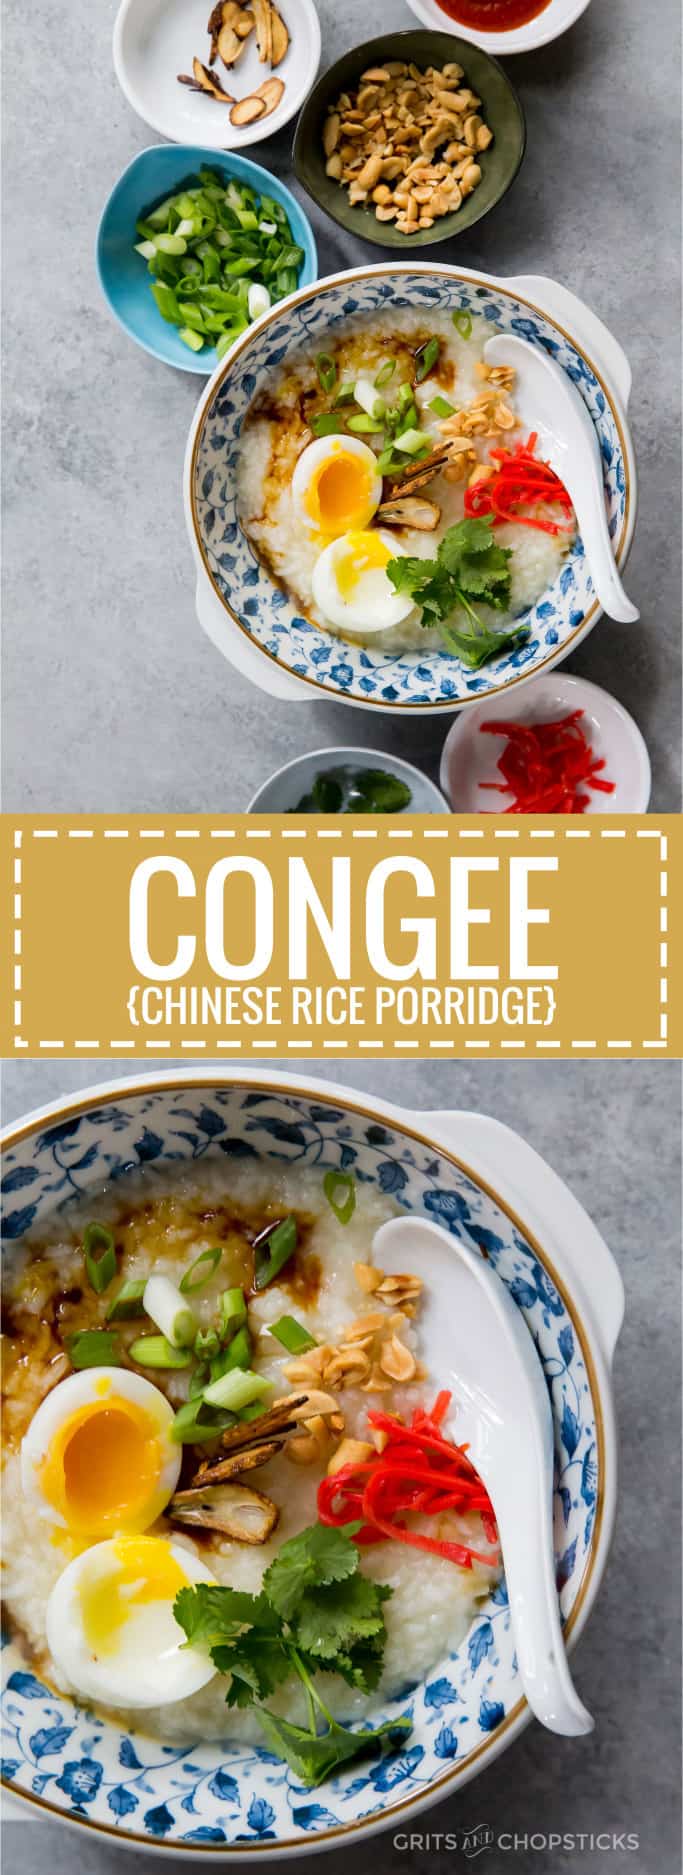 Congee, or Chinese rice porridge, is a simple, hearty meal that can have lots of variety in its toppings